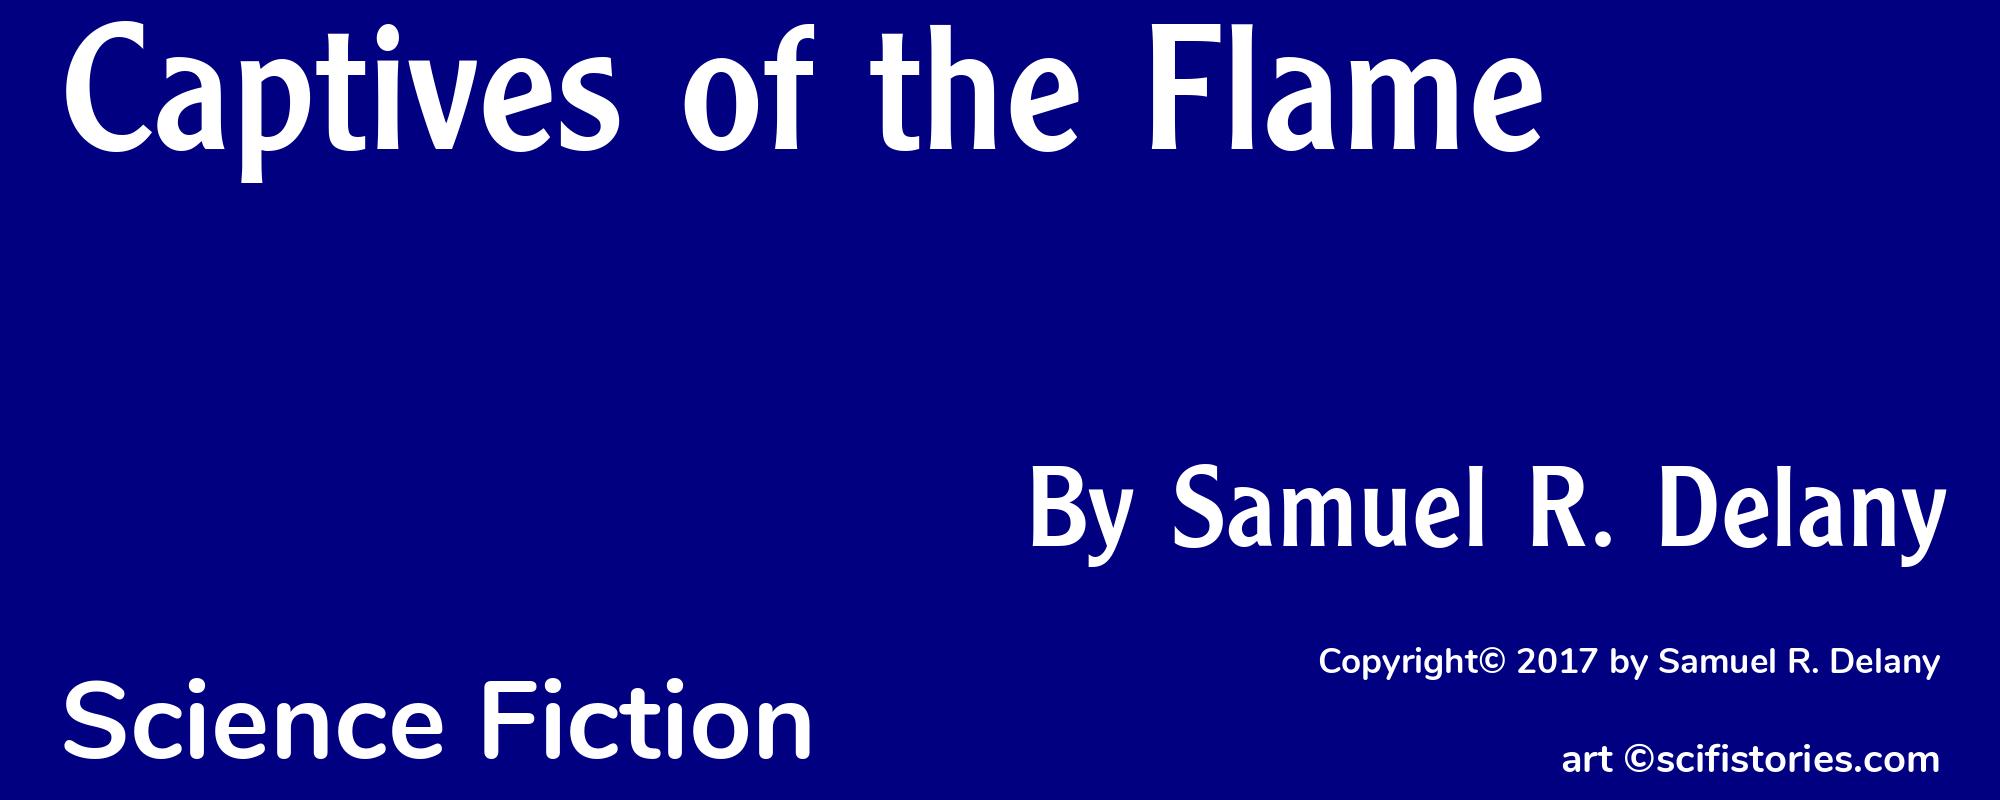 Captives of the Flame - Cover